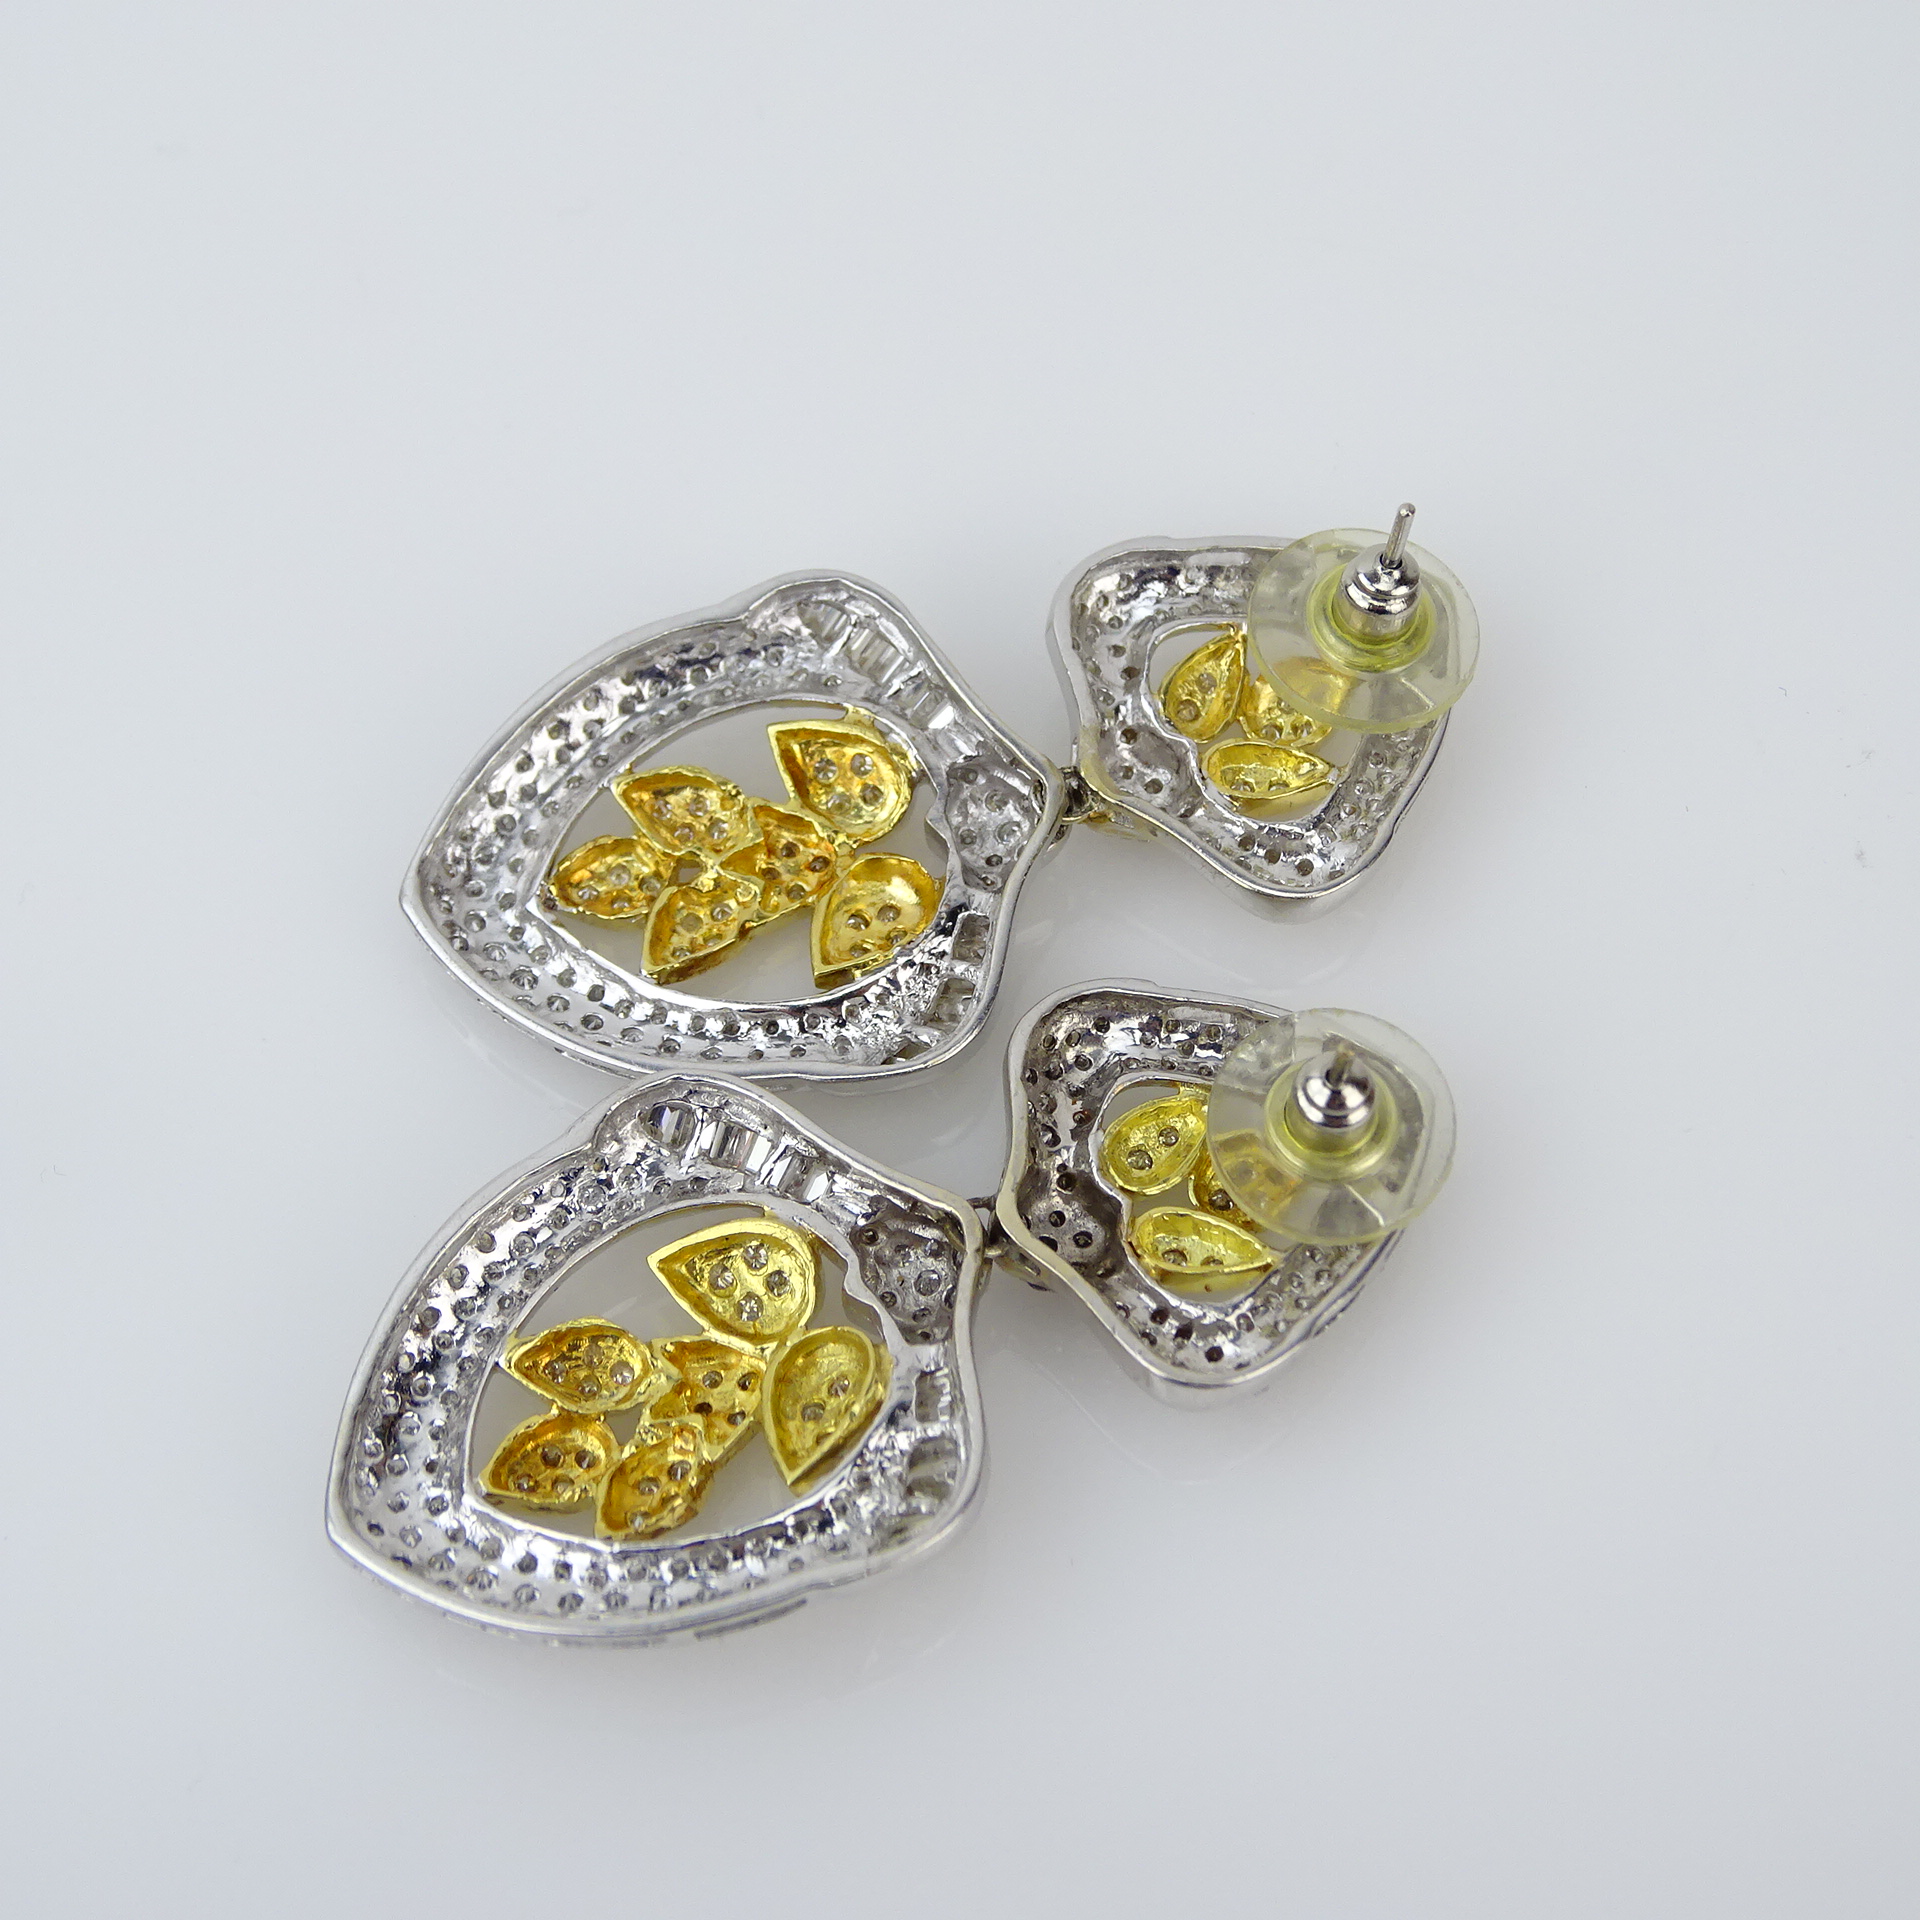 Pave Set Round Cut and Baguette Diamond and 18 Karat White and Yellow Gold Pendant Earrings